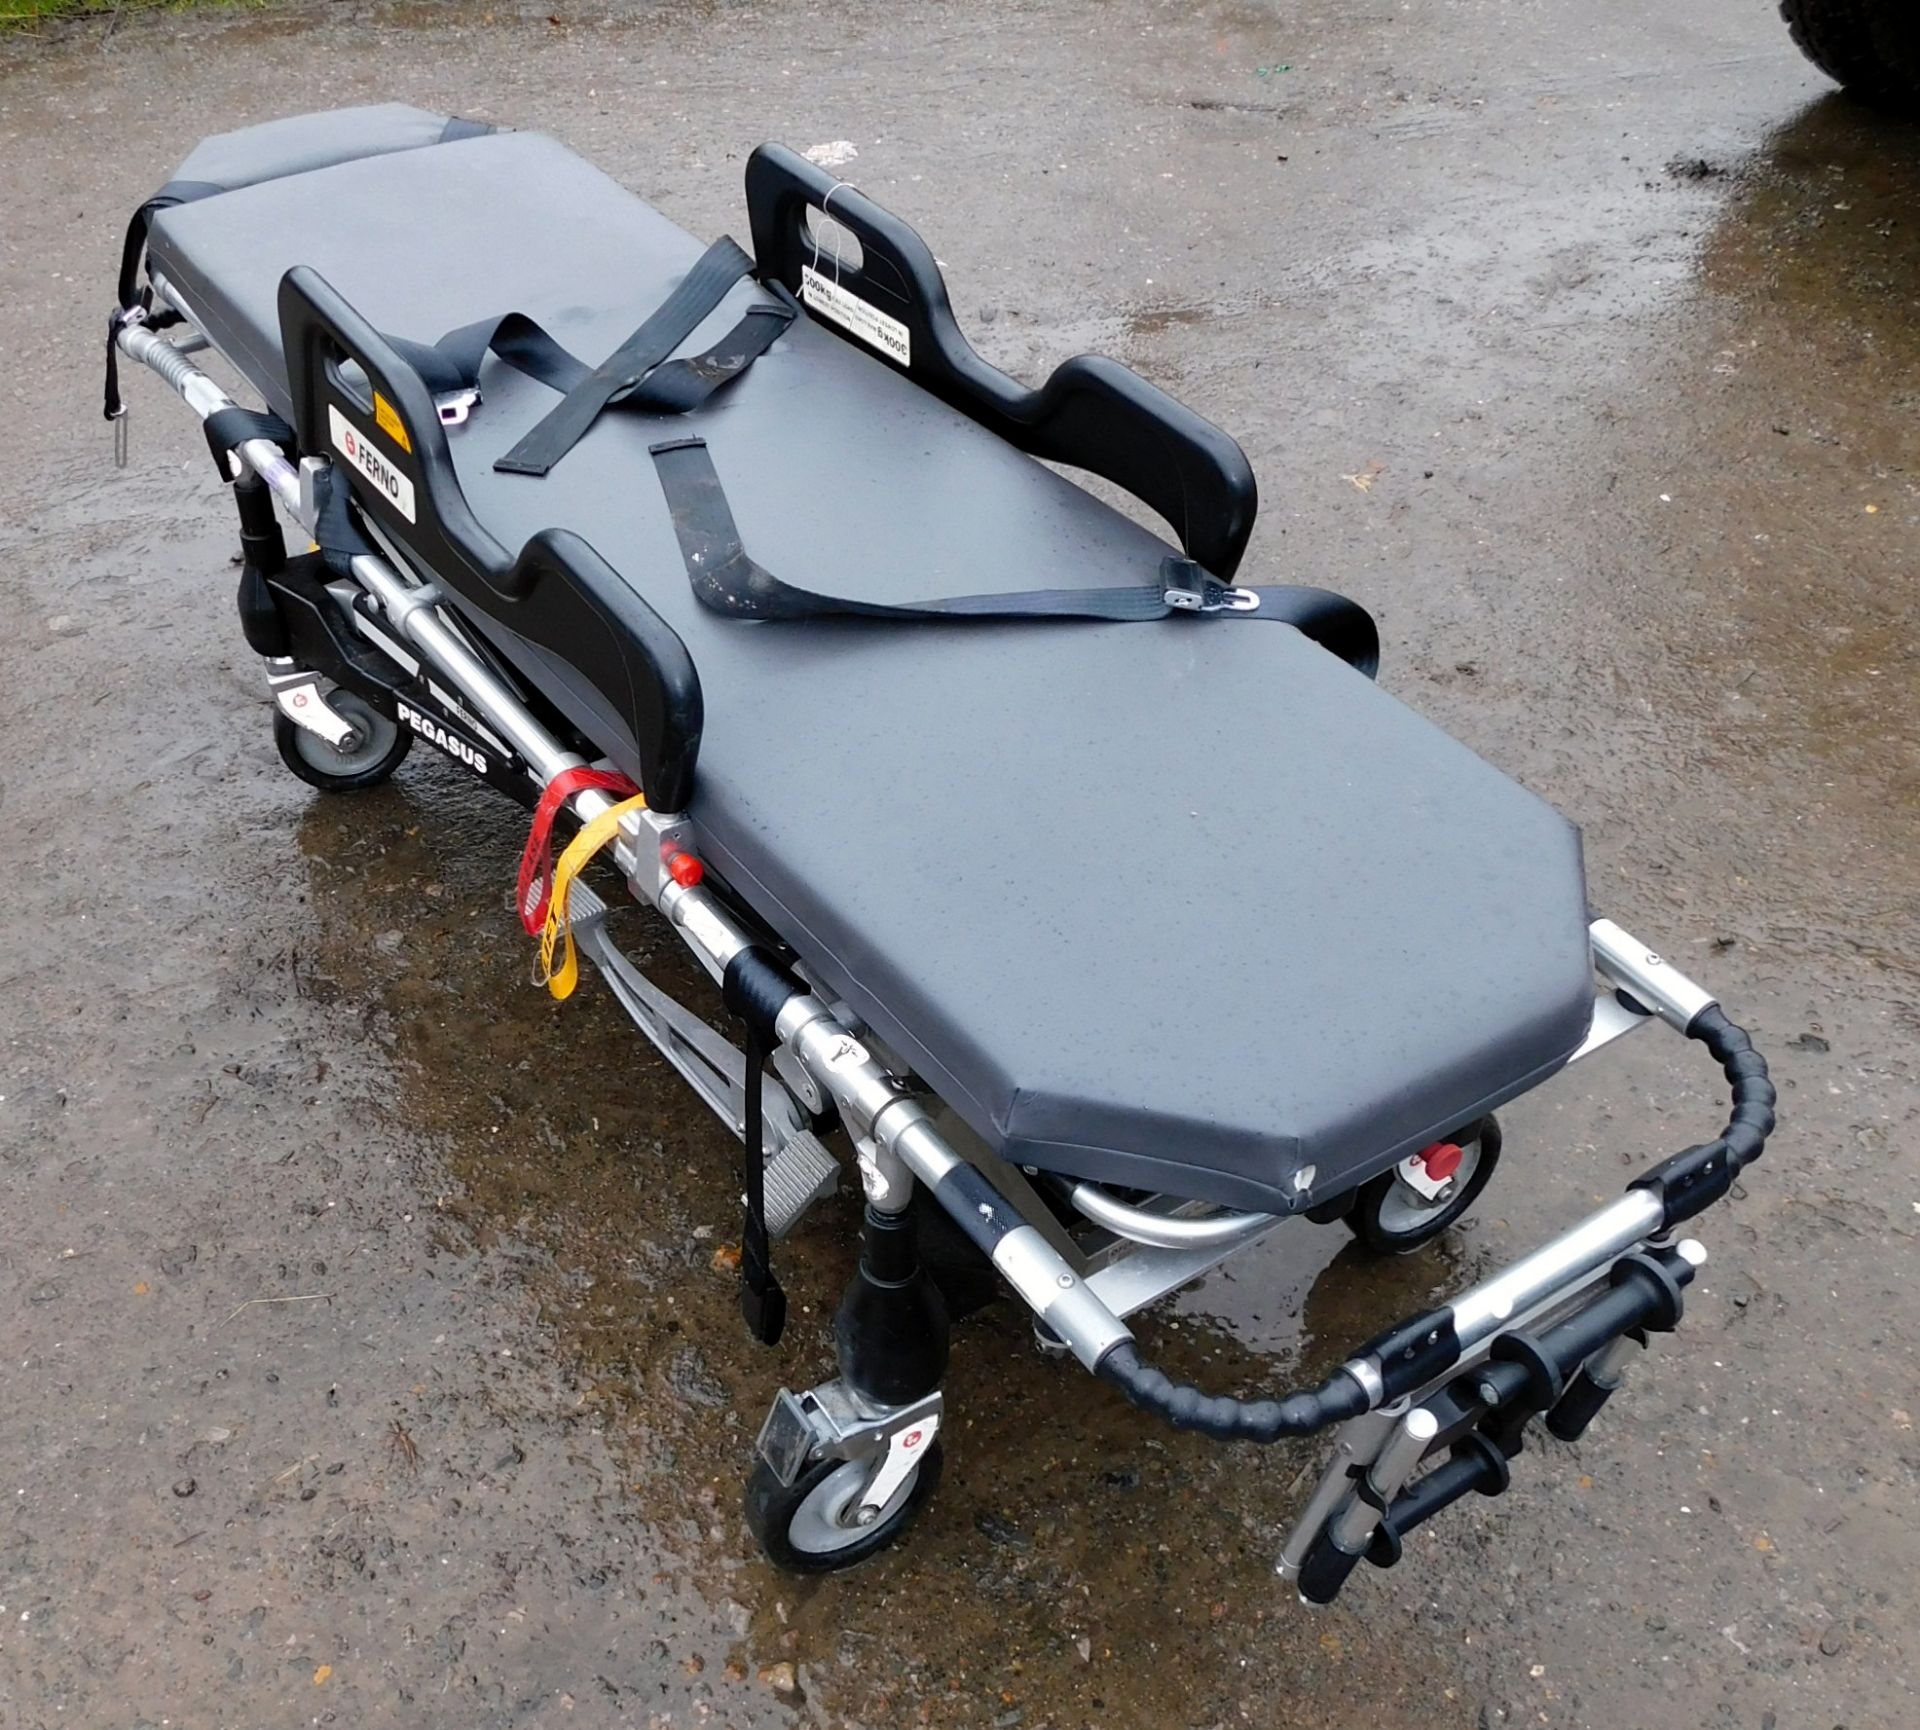 Ferno Pegasus Stretcher s/n PEG 6200 (2014), Lift Count 1837 (Stored on Lot 27) (Located South - Image 3 of 5